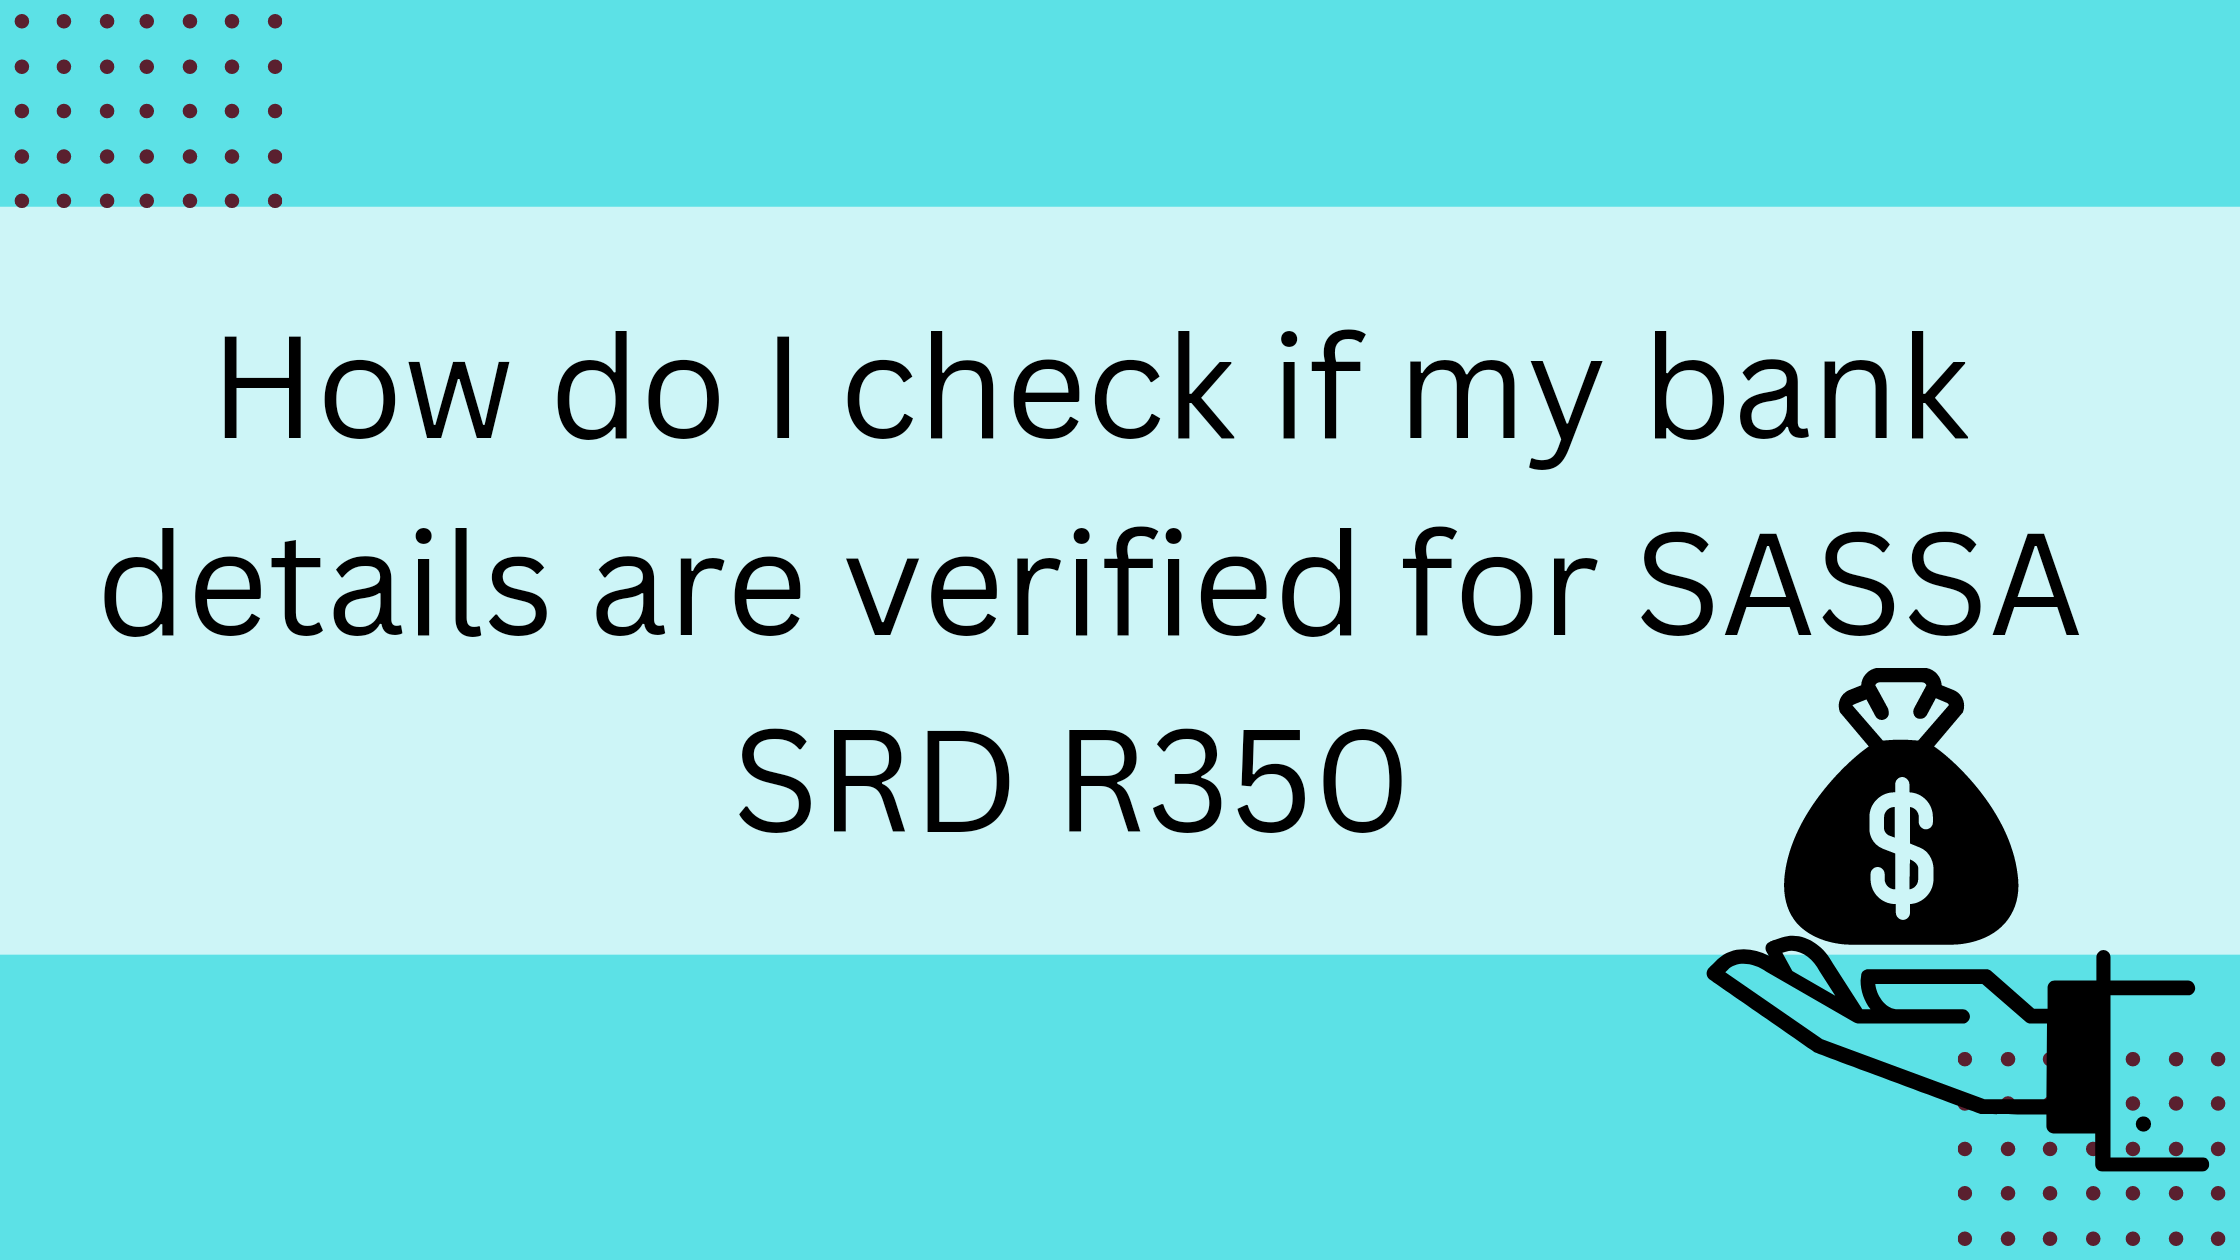 How do I check if my bank details are verified for SASSA SRD R350